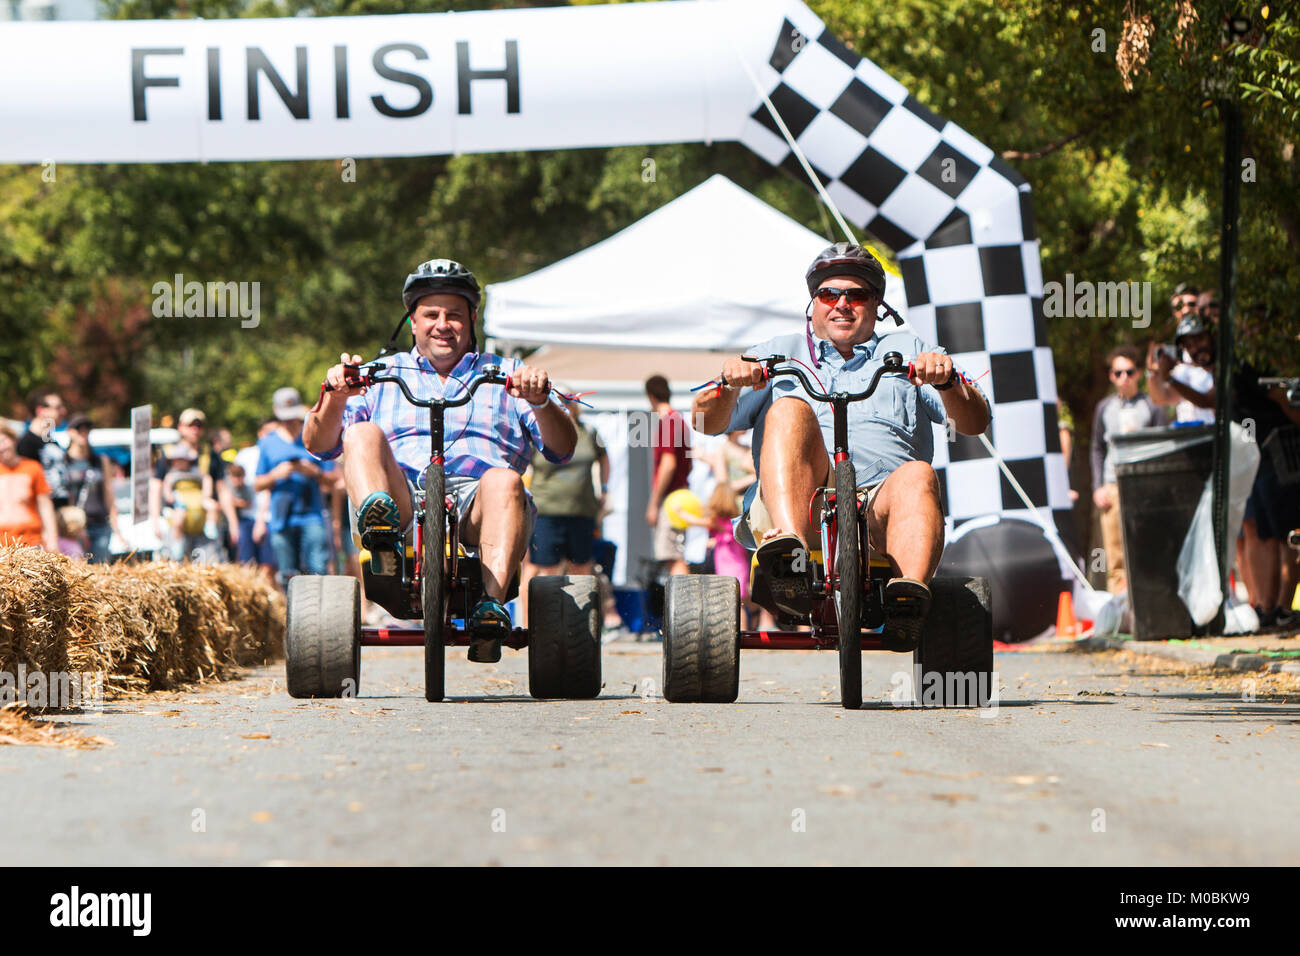 Atlanta, GA, USA - September 23, 2017: Two men race each other on adult big wheels in a friendly competition at the East Atlanta Strut festival. Stock Photo